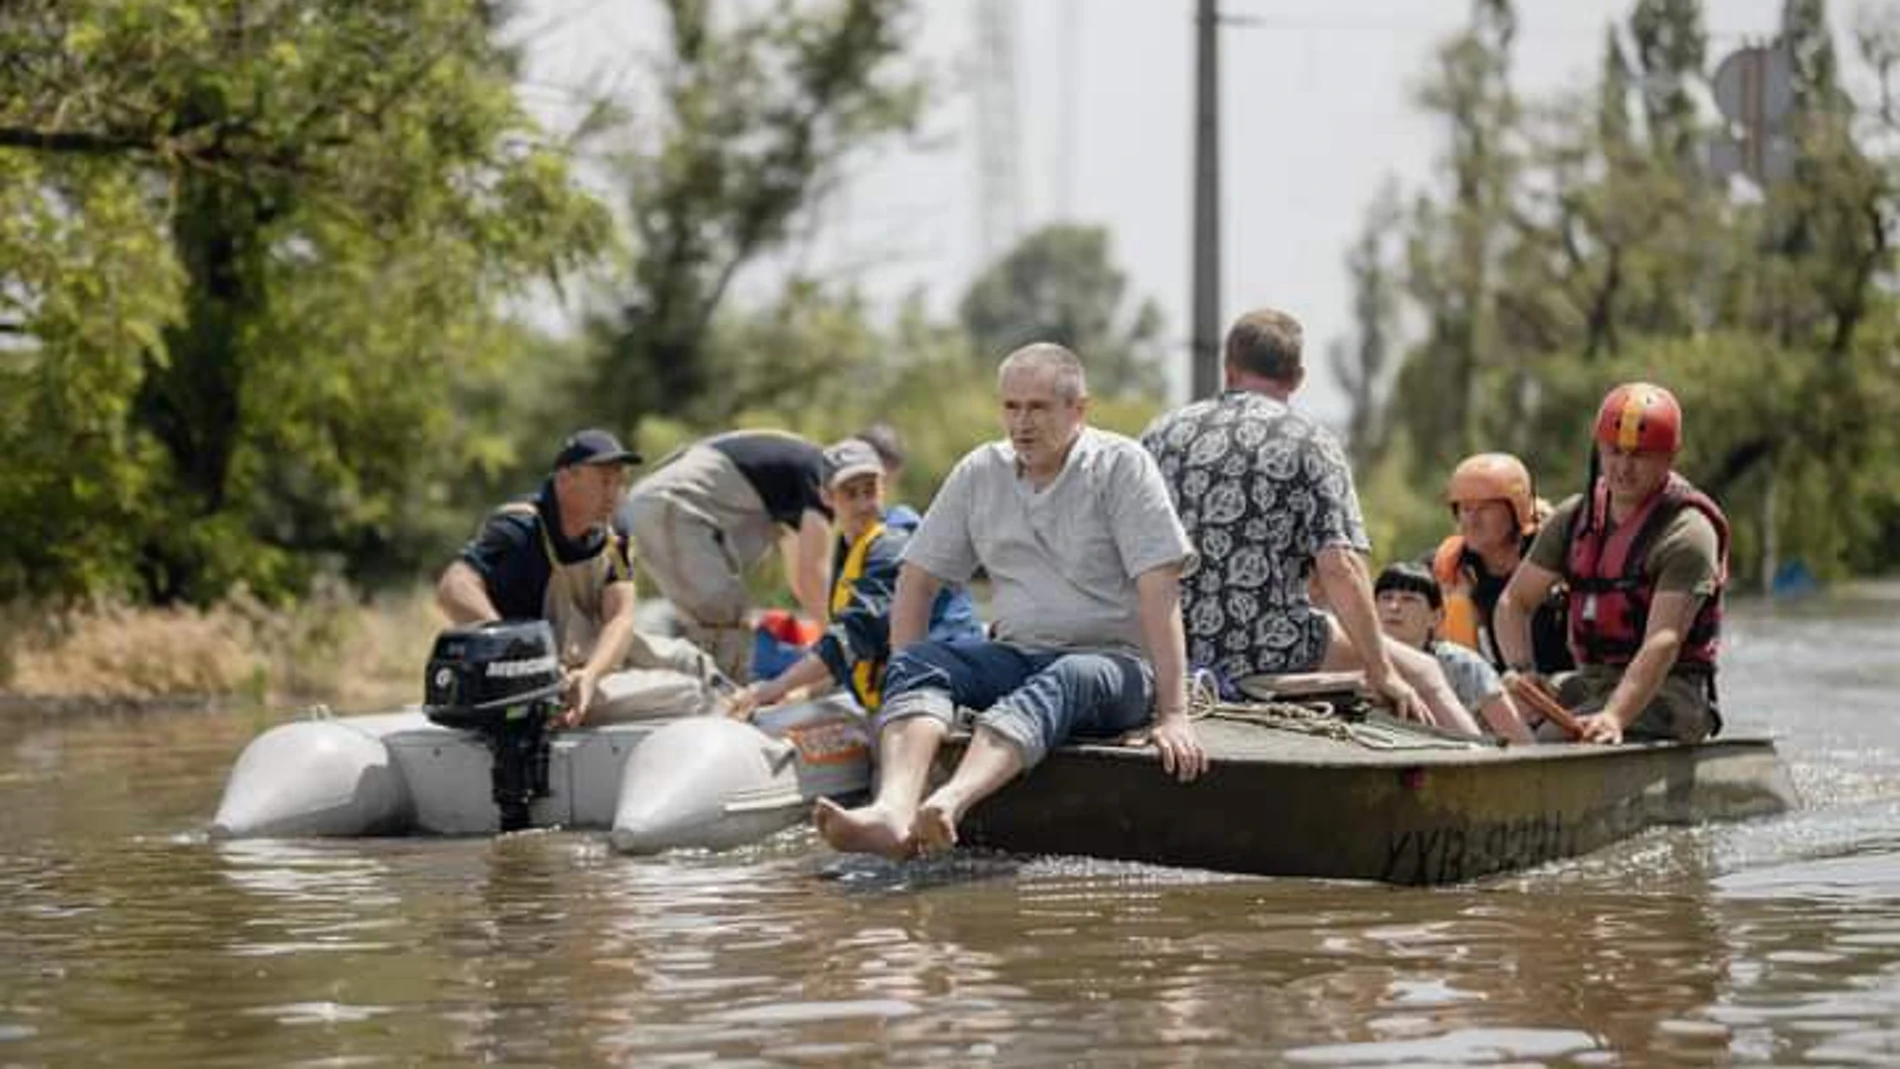 June 7, 2023, Kherson, Kherson Oblast, Ukraine: VIDEO AVAILABLE: CONTACT INFO@COVERMG.COM TO RECEIVE**..These images and this video footage shows rescue efforts in Ukraine's flood-hit Kherson region on Wednesday (07June2023). Members of Ukraine's police force, military, and emergency services have been leading efforts to evacuate people - and in some cases, their beloved pets...Residents of areas of Kherson near to the Dnipro river have been forced to leave their homes as they have become inu...